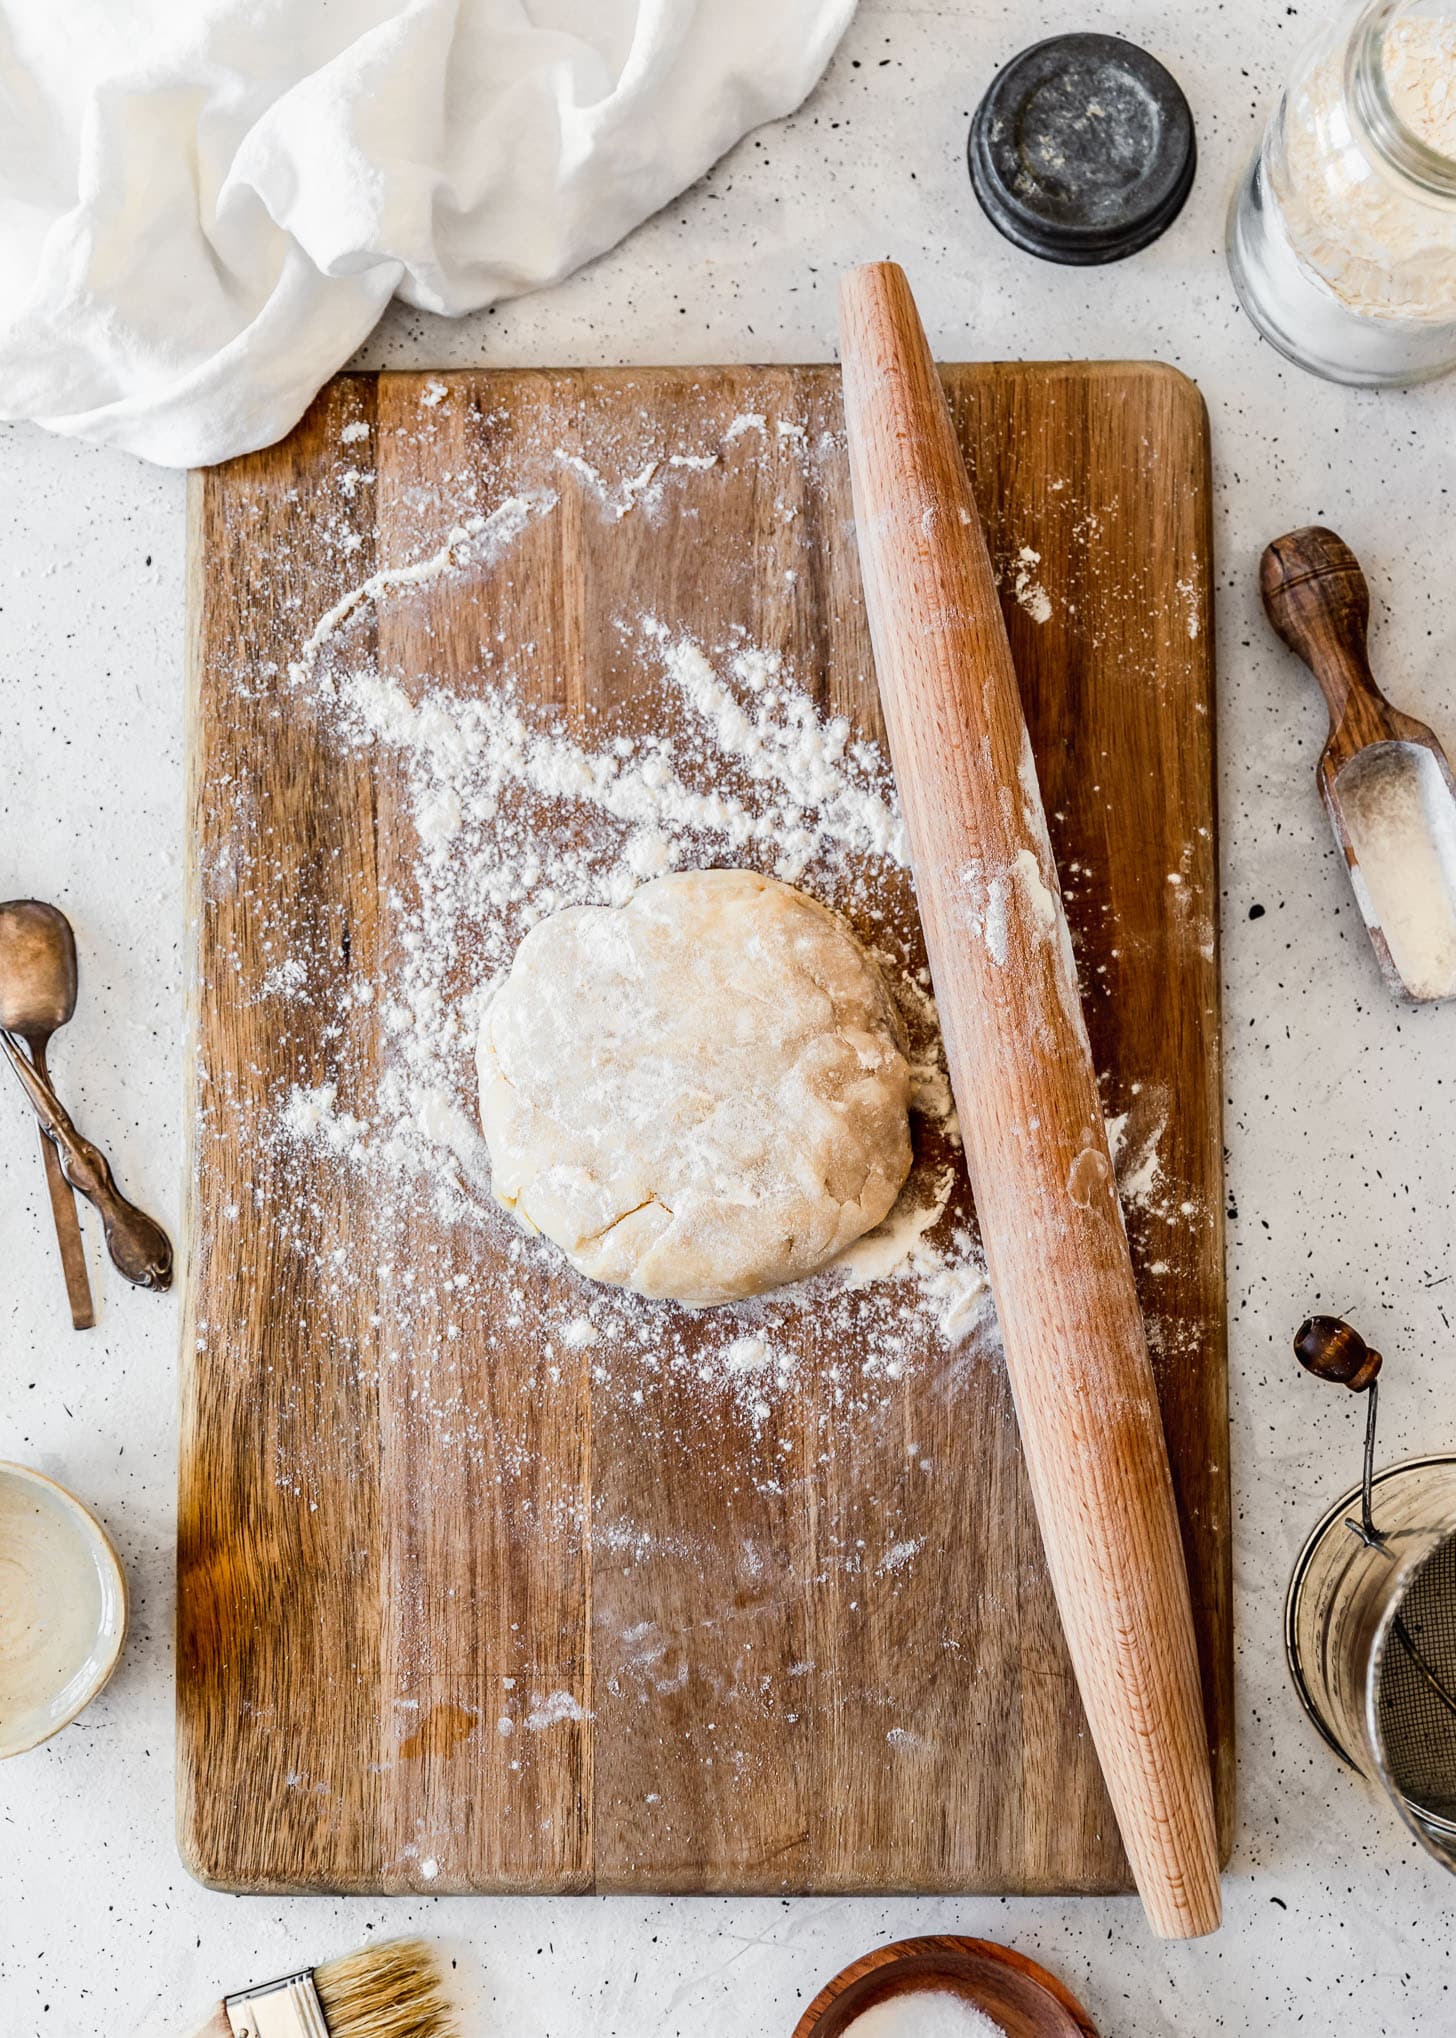 A disc of pie dough on a wood board surrounded by pie ingredients and tools with a white speckled background.